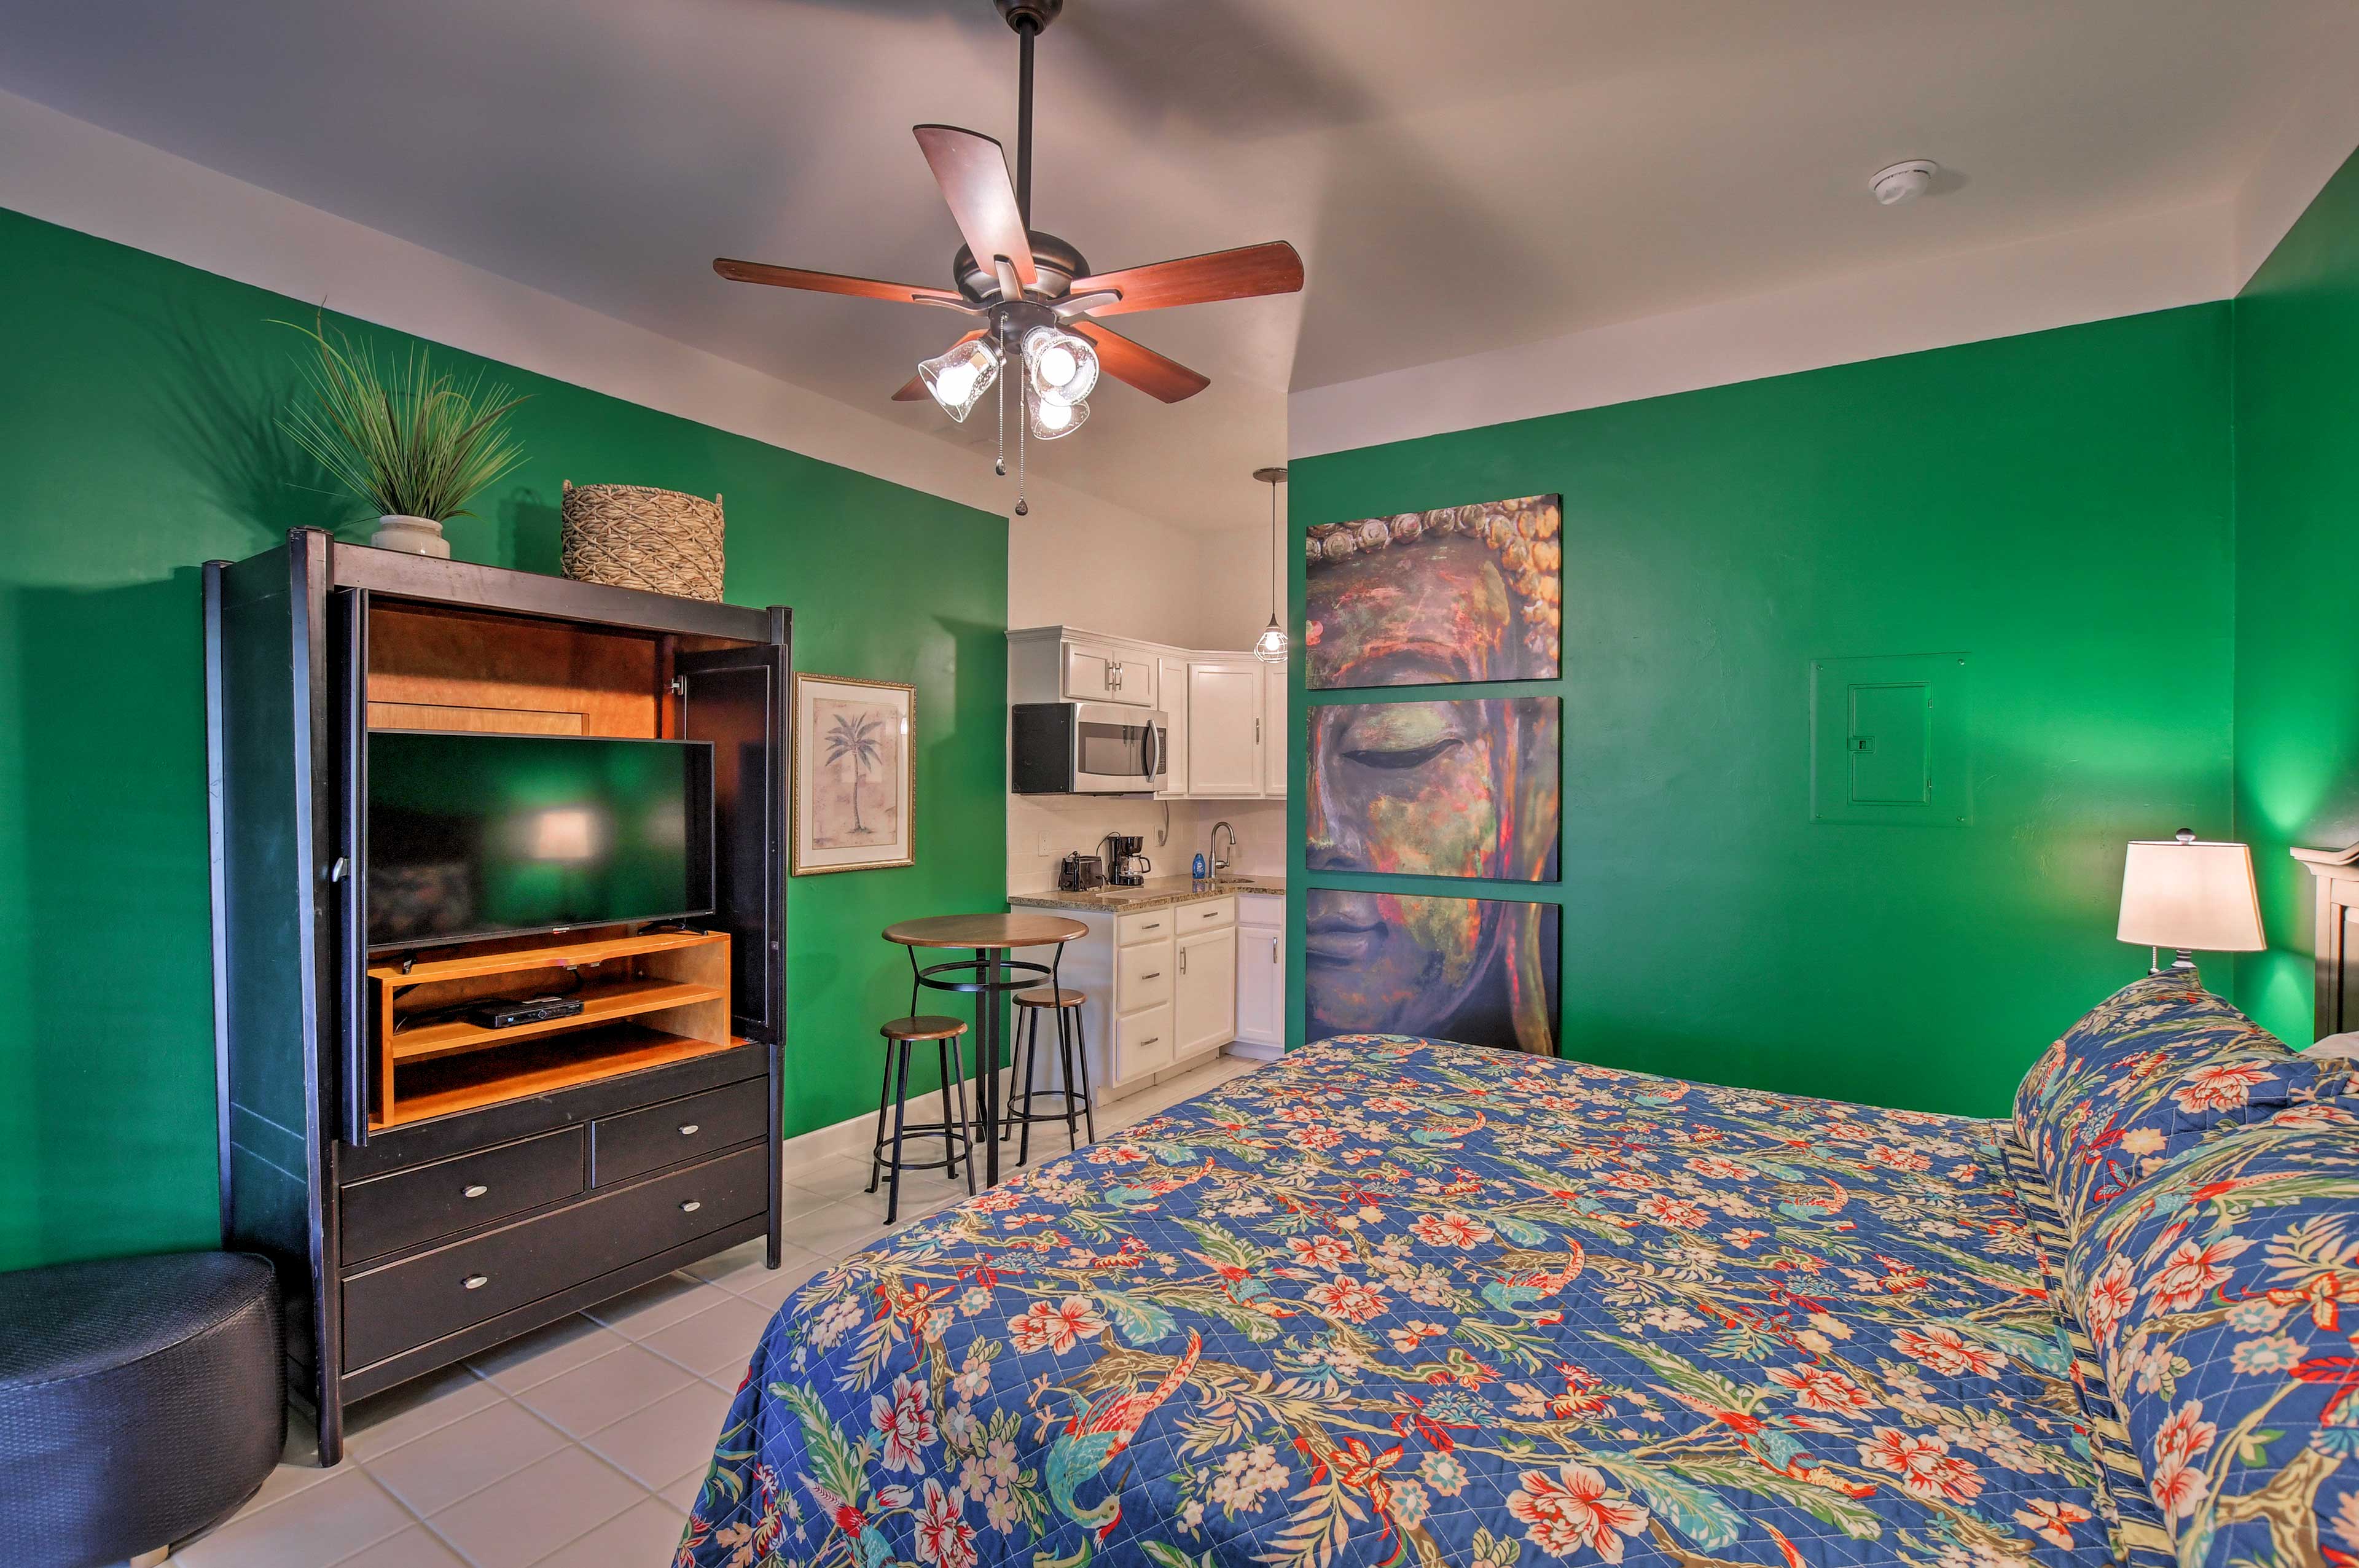 This vibrant studio has a comfortably furnished interior and all the essentials!